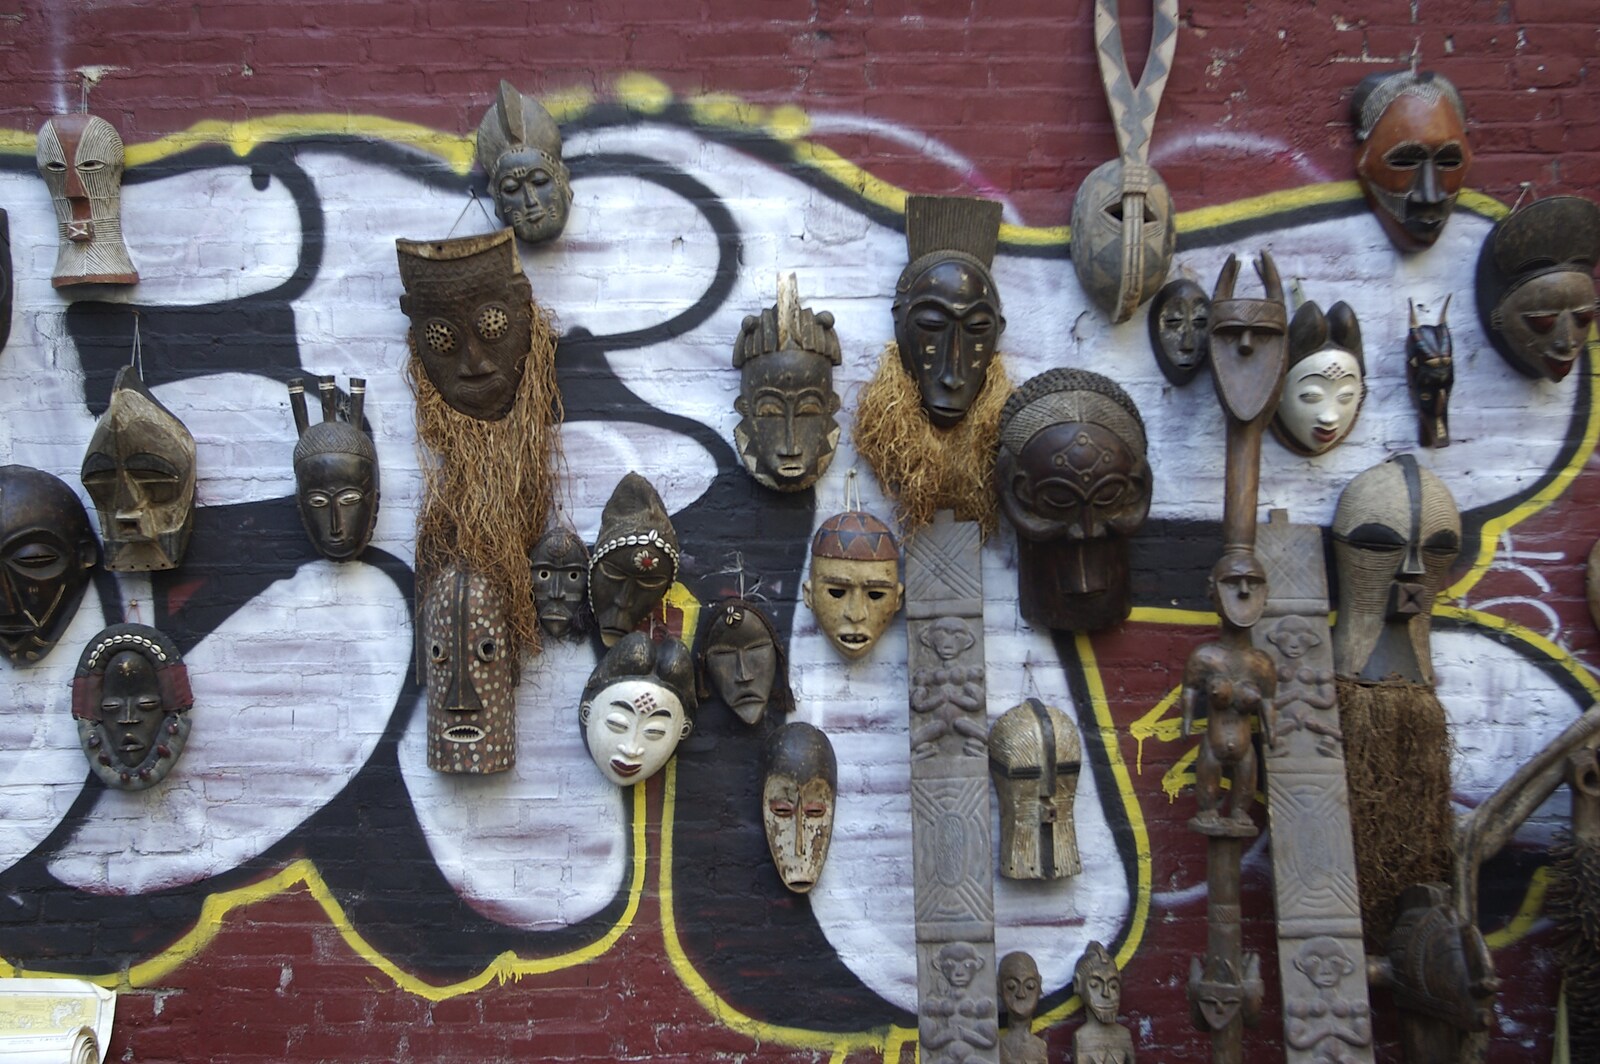 Crossing Brooklyn Bridge, New York, US - 26th March 2007: An interesting collection of masks on a wall